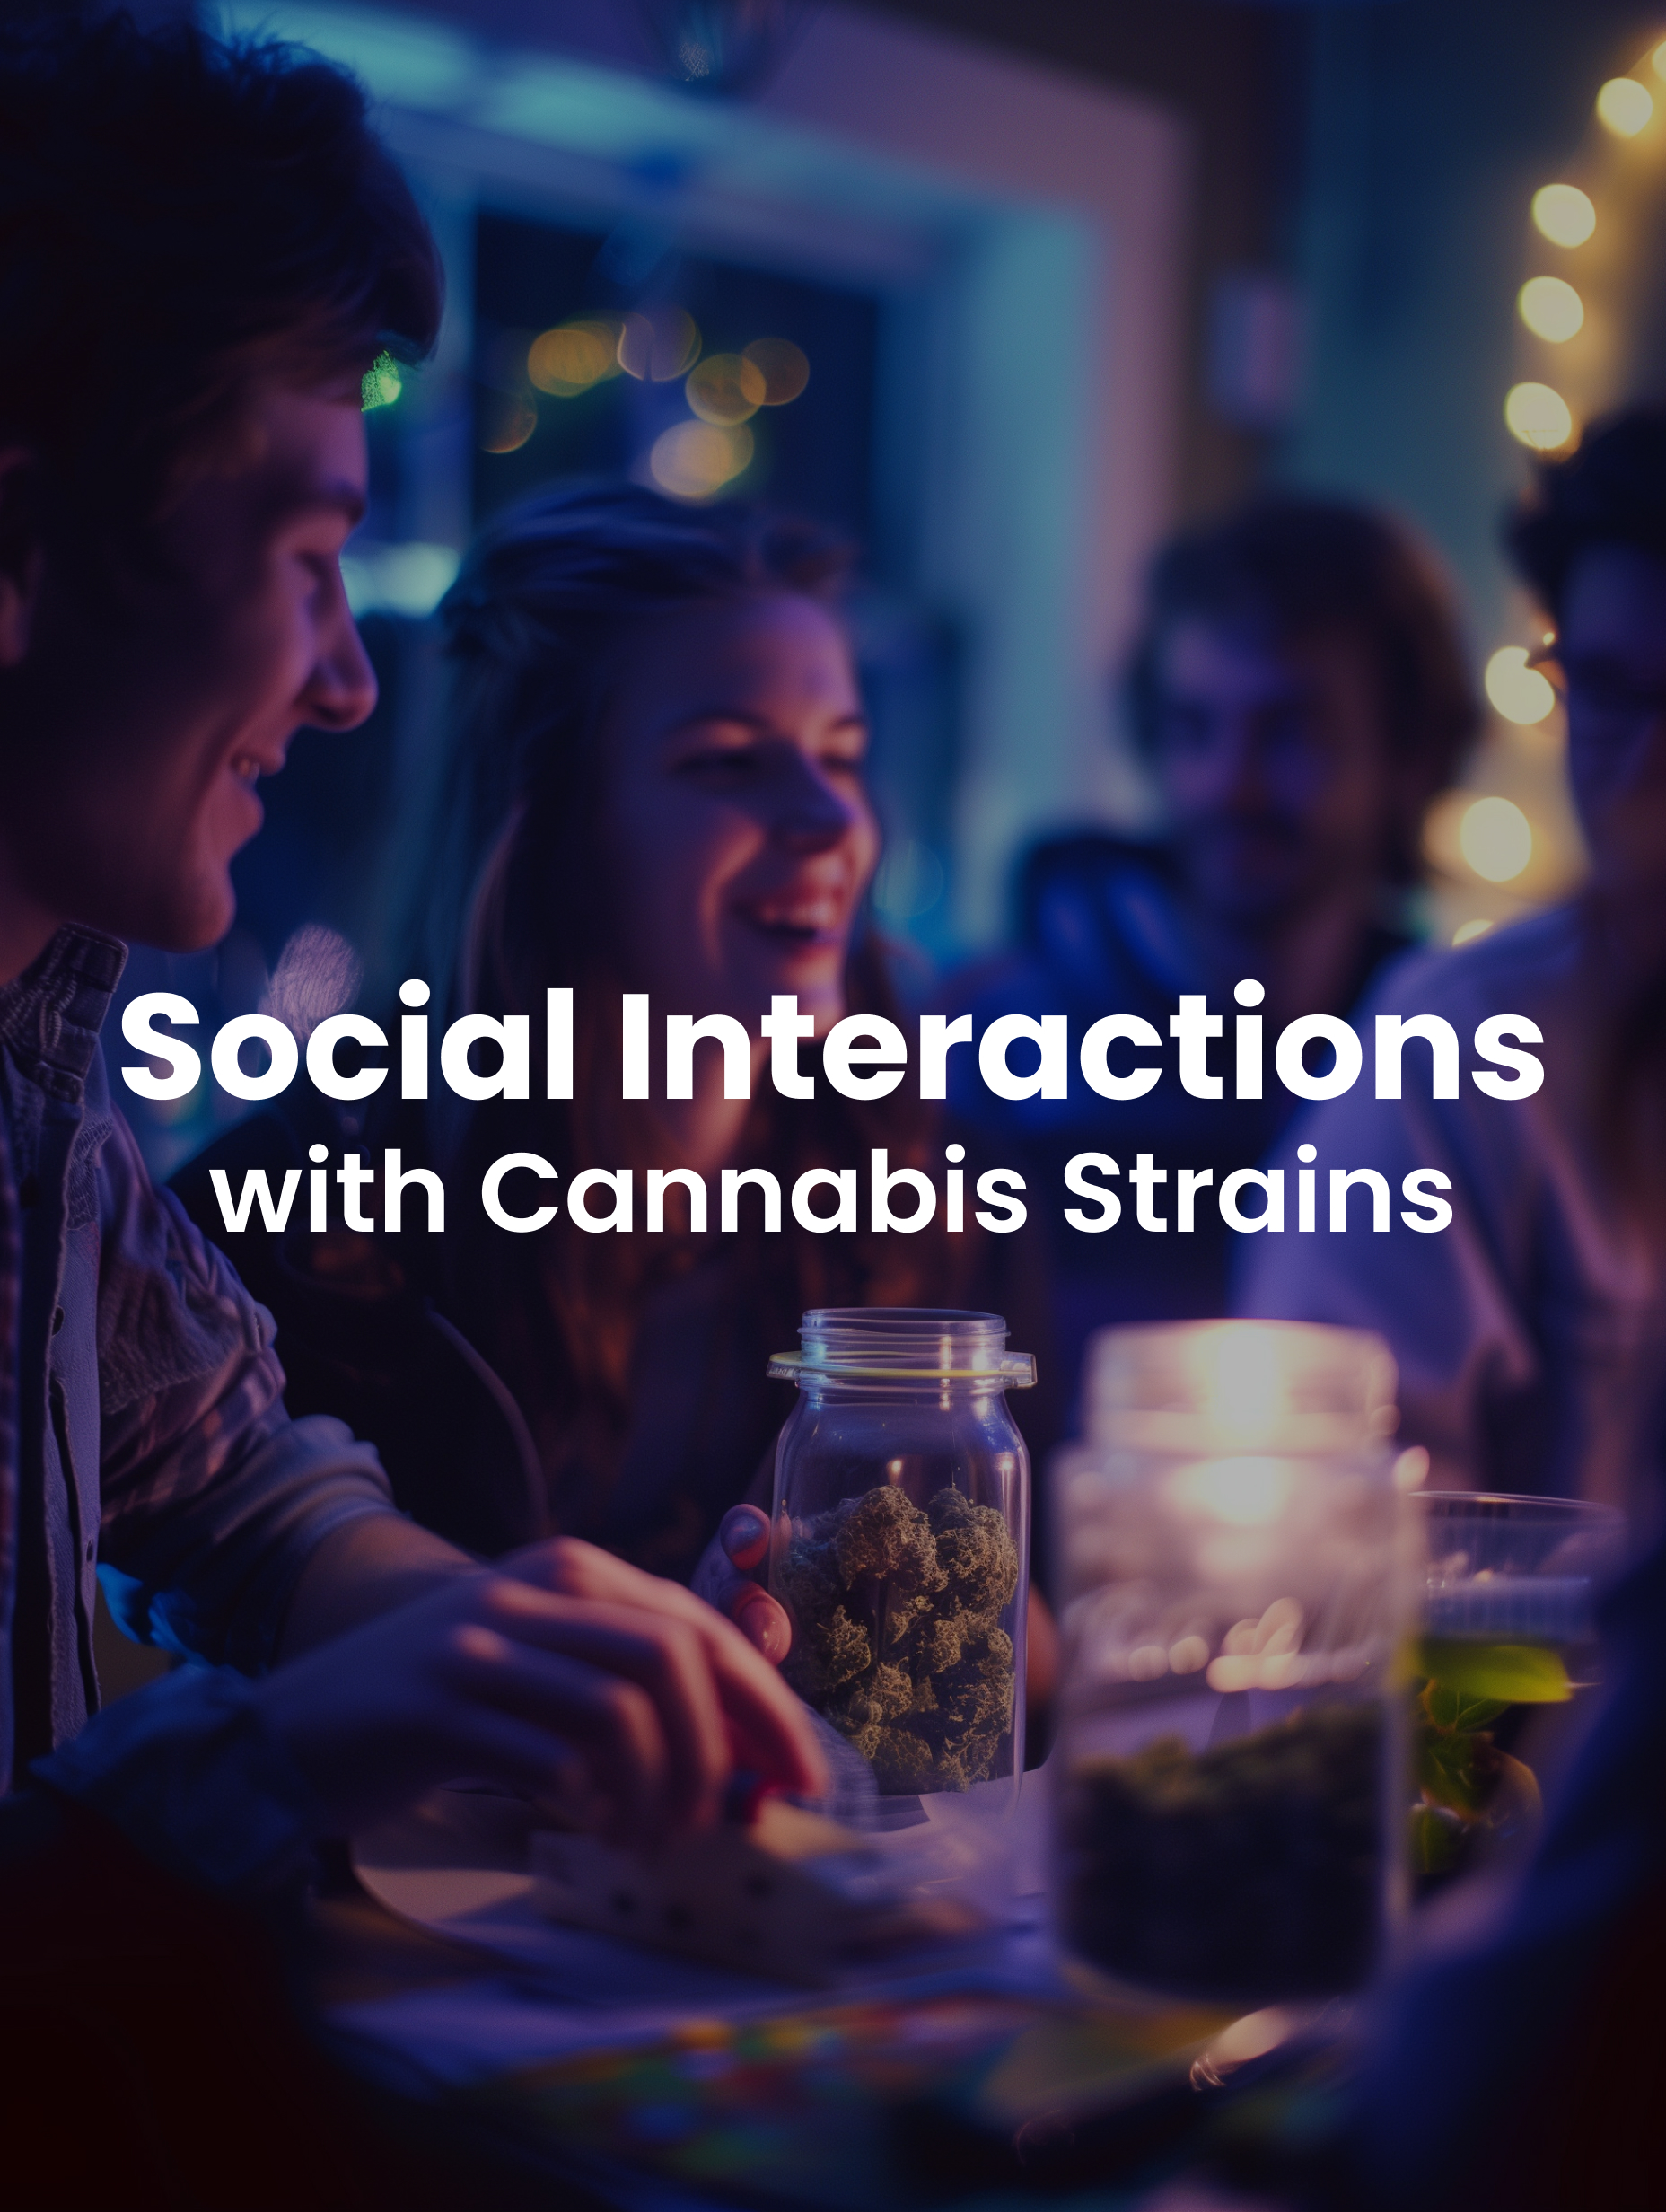 Social Interactions with Cannabis Strains